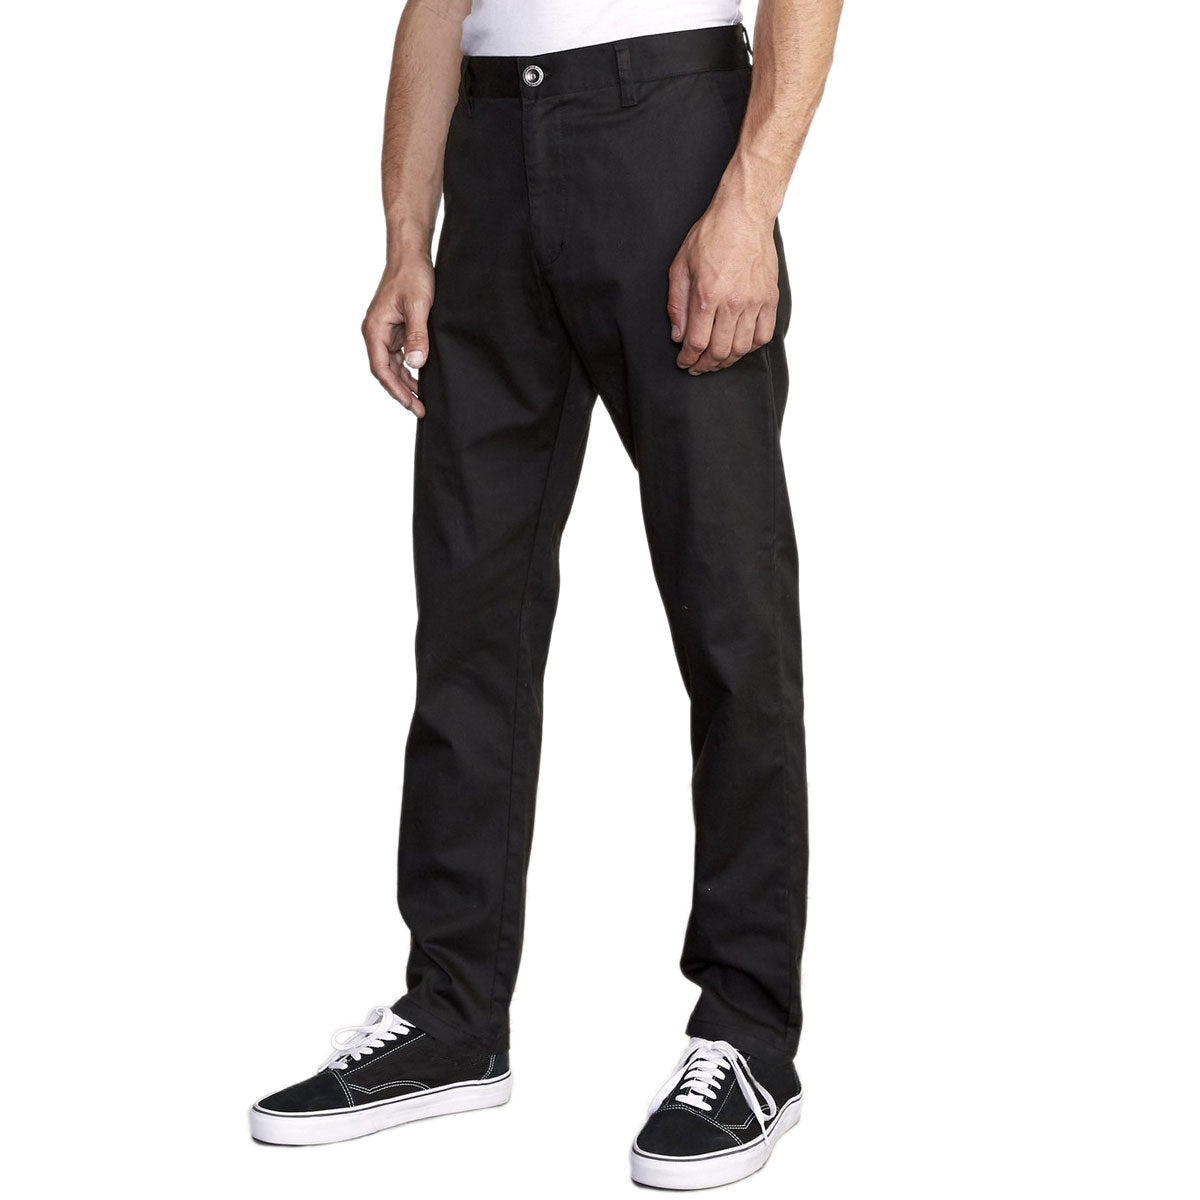 RVCA The Weekend Stretch Pants - Black image 2